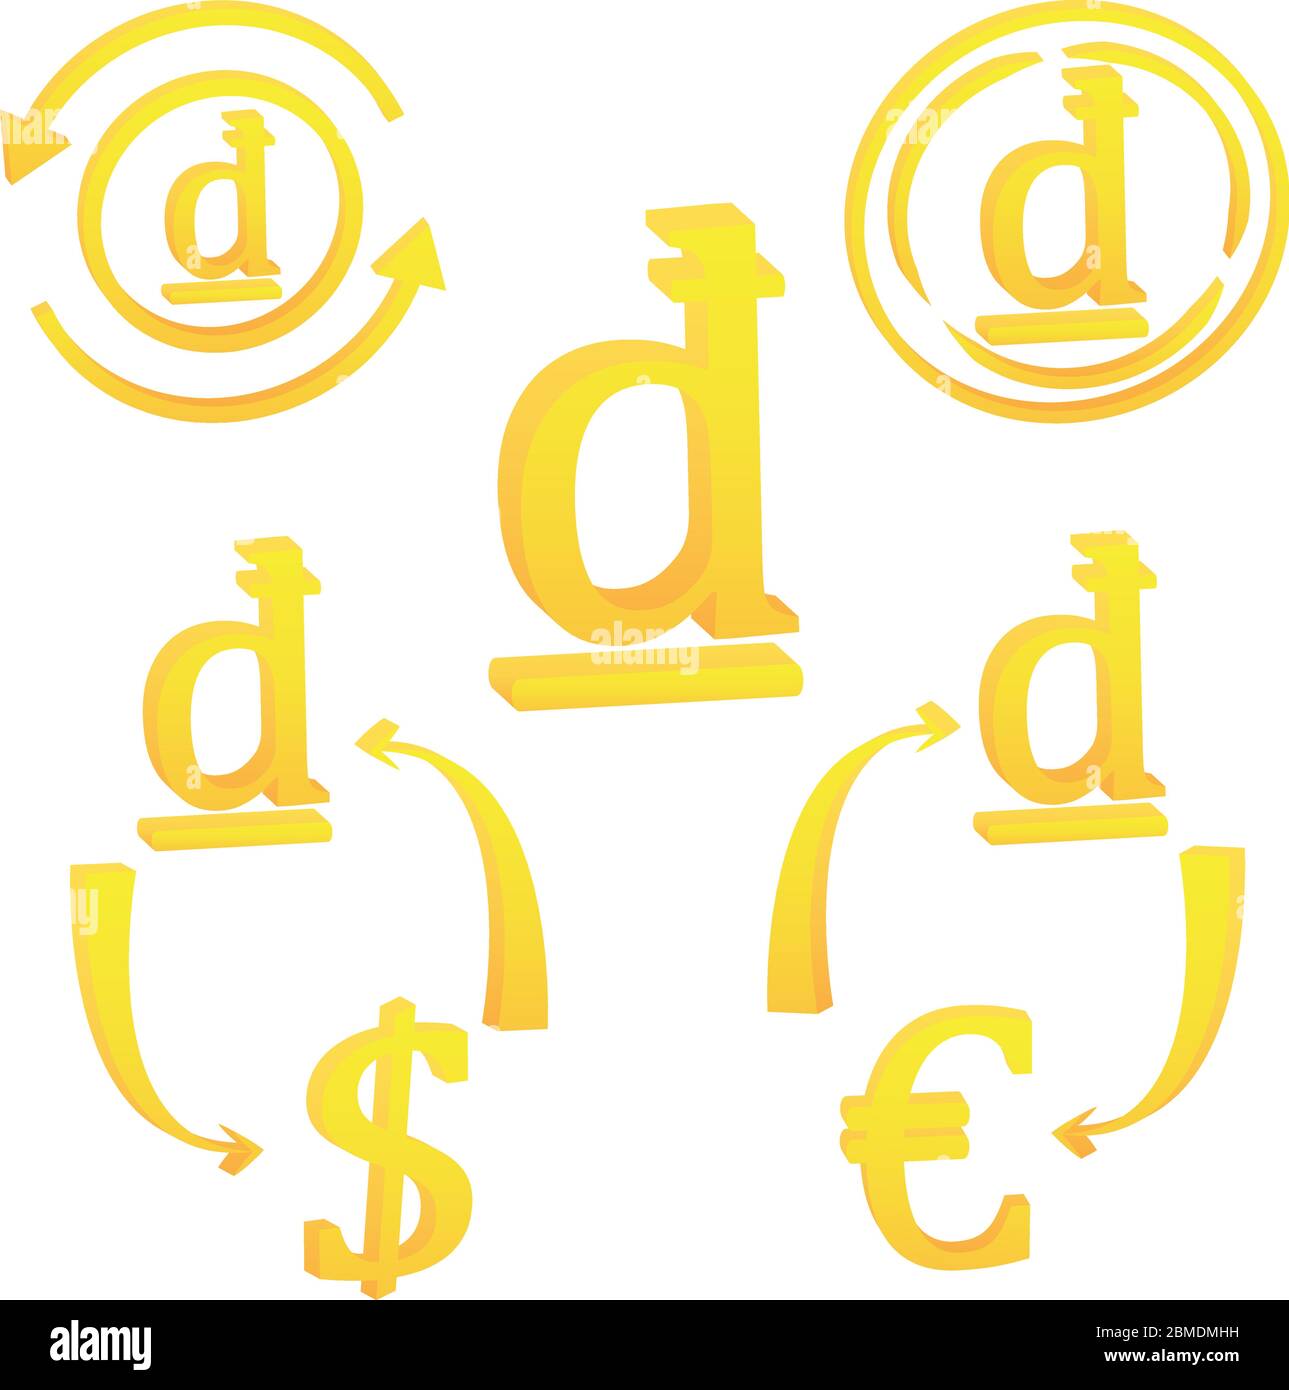 3D Vietnamese Dong currency symbol icon of Vietnam Stock Vector